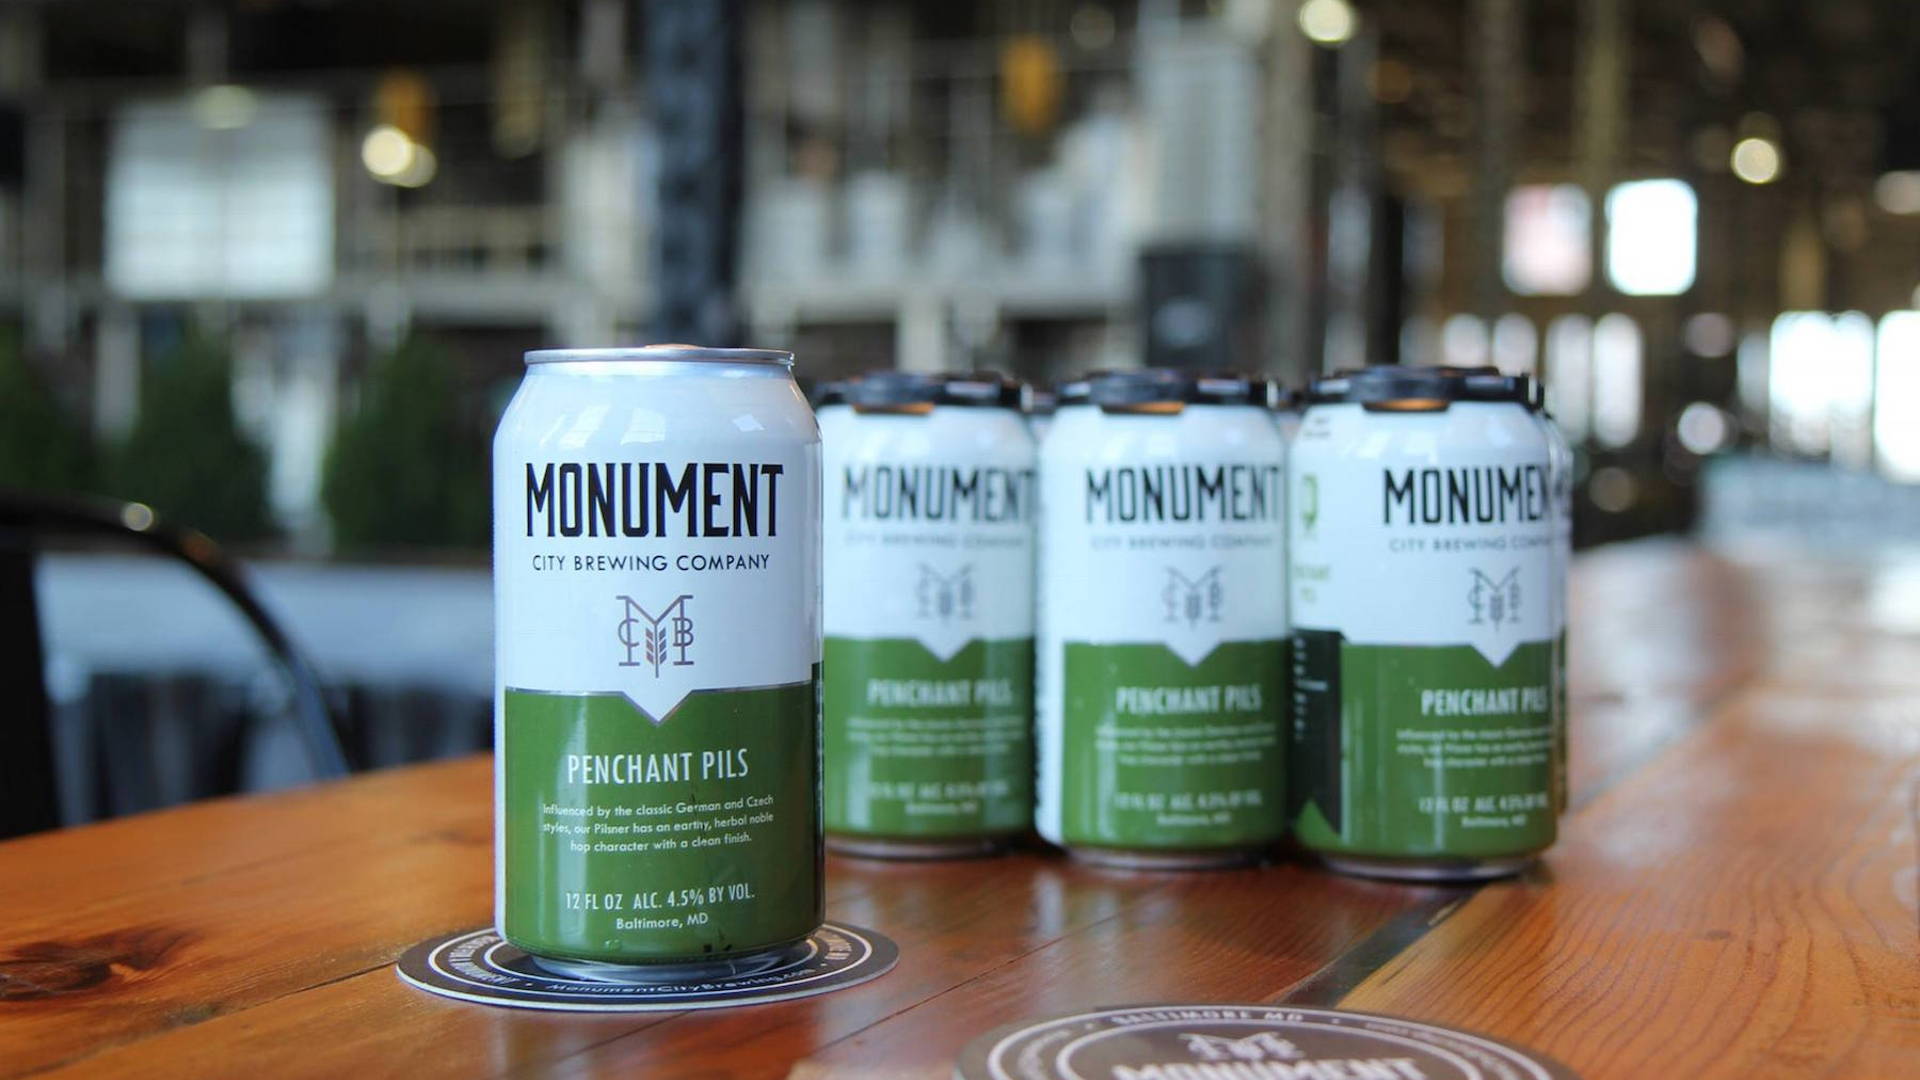 Featured image for Monument City Brewing Company Beer Shows off the Brewery’s Baltimore Roots